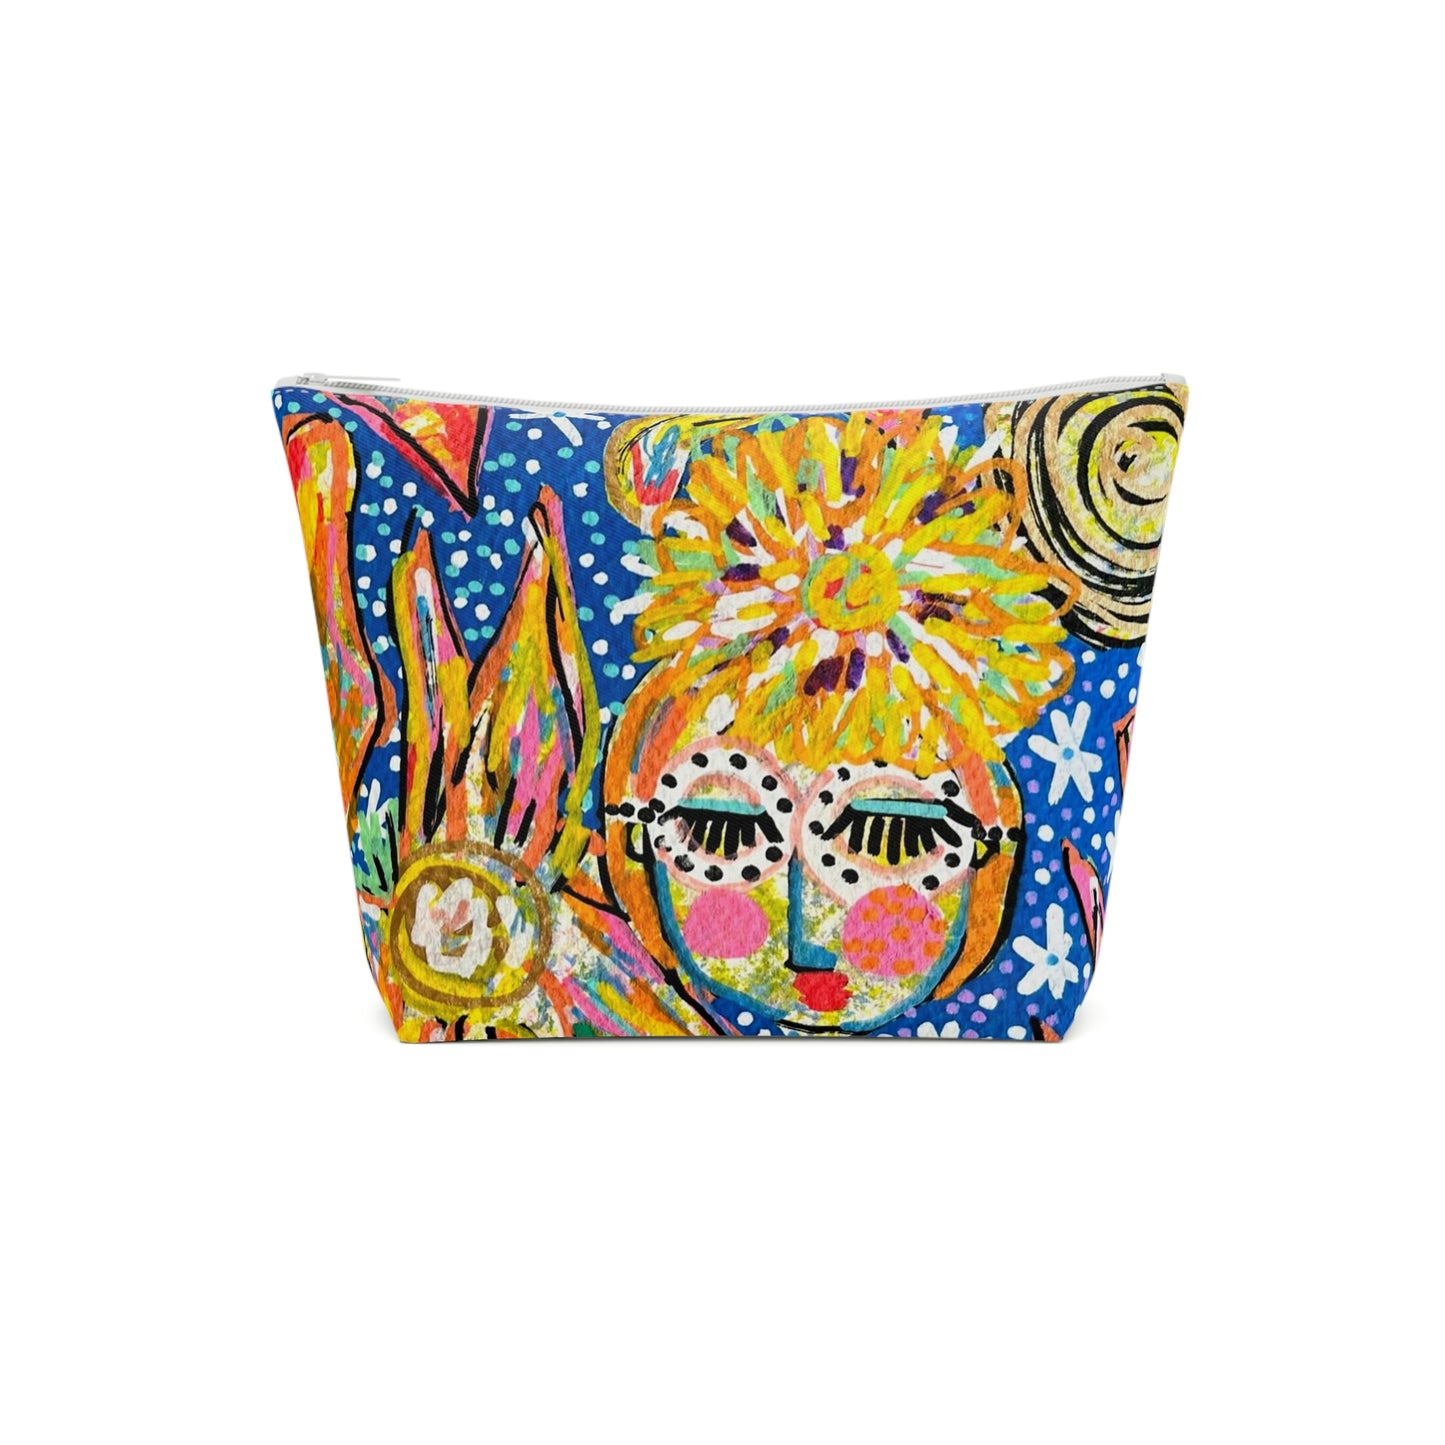 "MAY ALL YOUR DREAMS COME TRUE" Cotton Cosmetic Bag